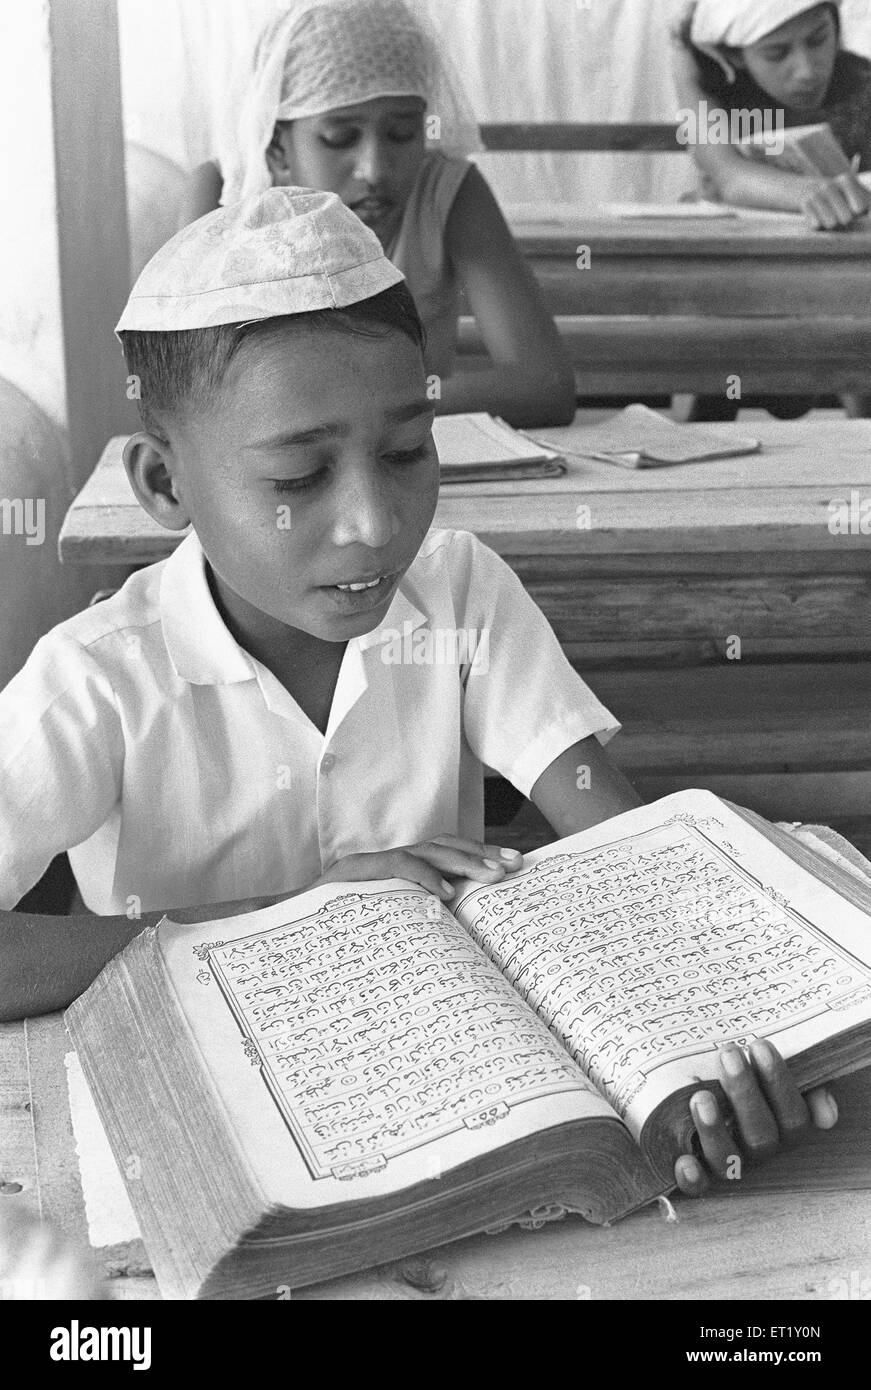 Pupil in classroom ; Male ; capital of Maldives, Asia ; old vintage 1900s Stock Photo